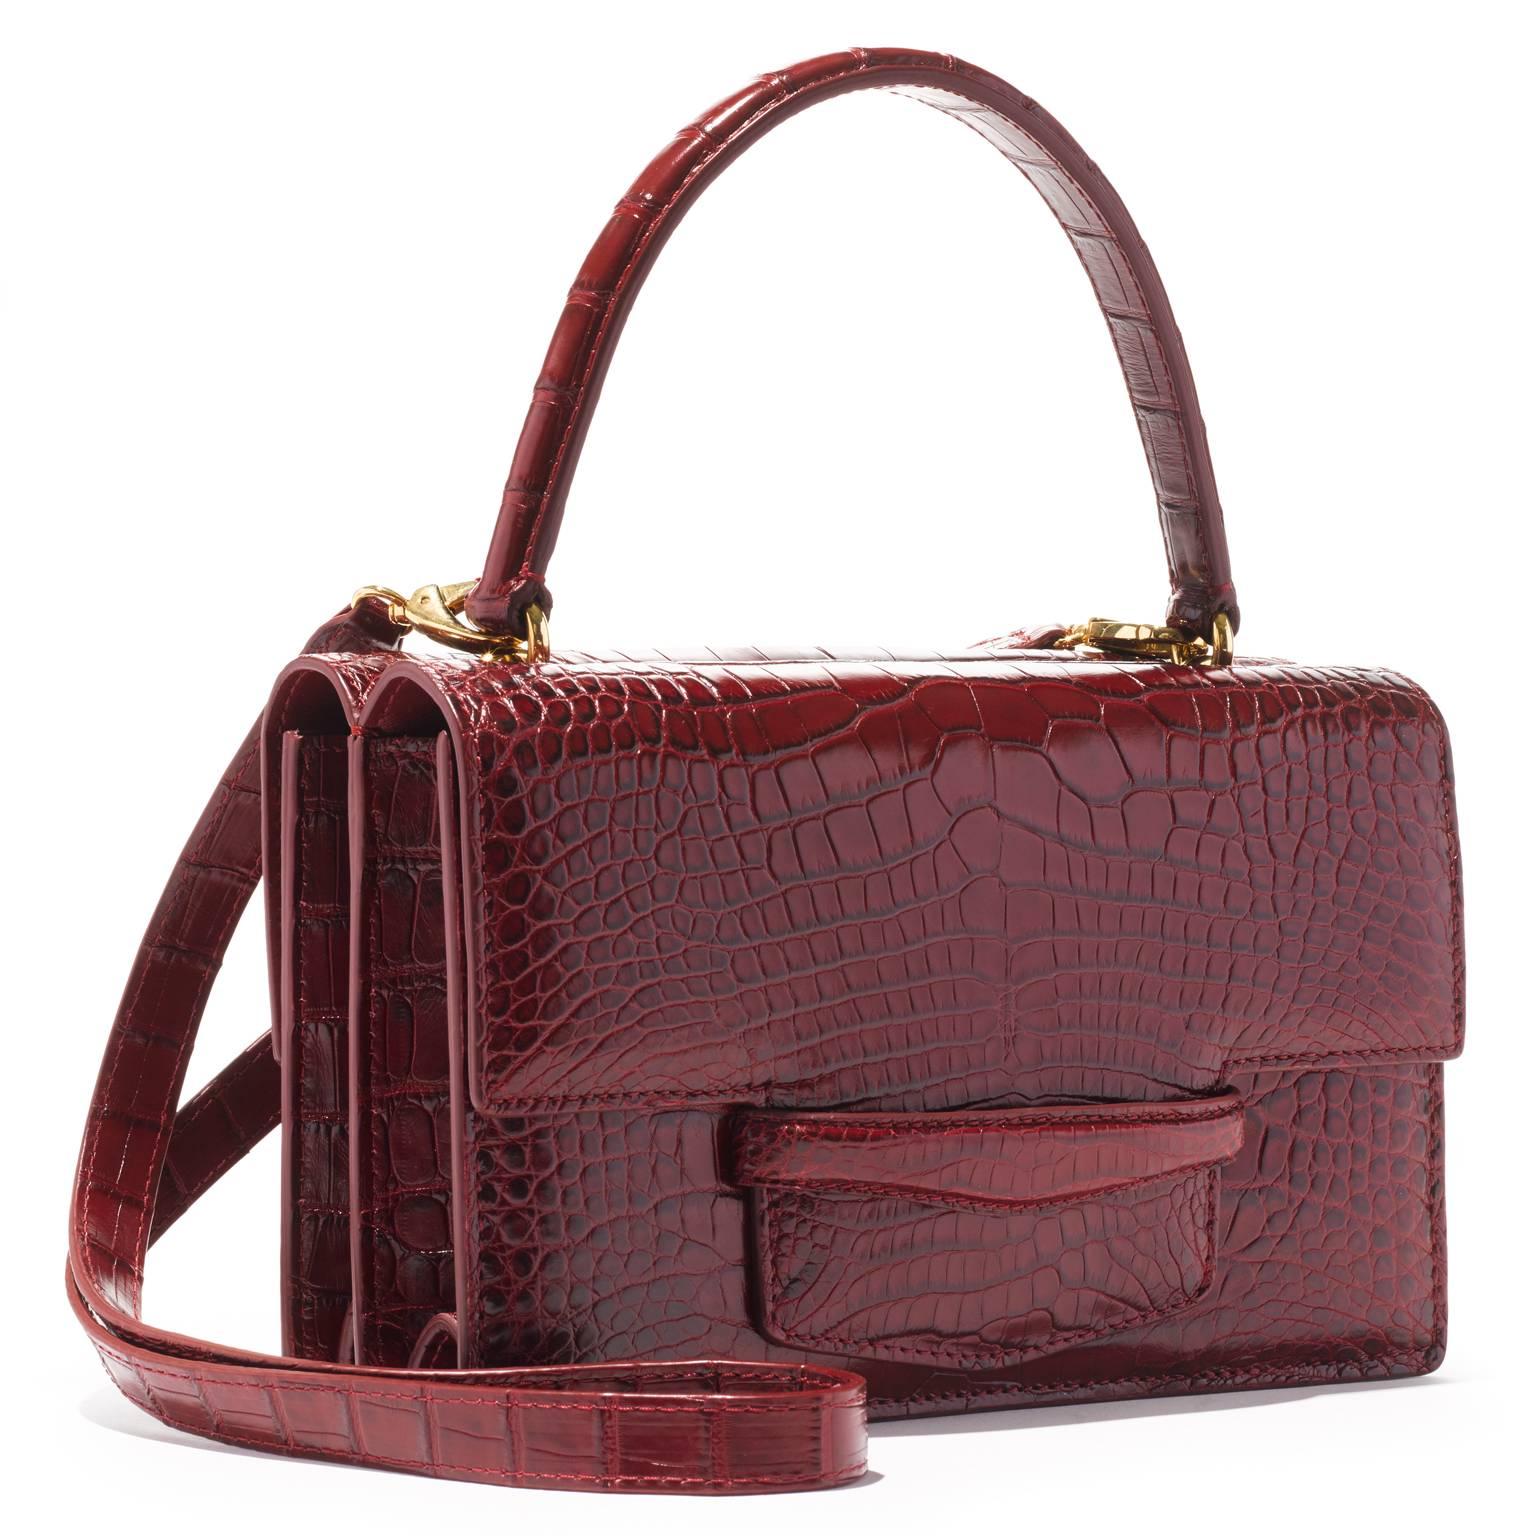 This double gusseted alligator bag is fully lined in leather. A stitched doubled sided handle is joined to the bag with interlocking gold rings. There is an additional 40” detachable shoulder strap. 

- one exterior pocket in center of the bag 
-